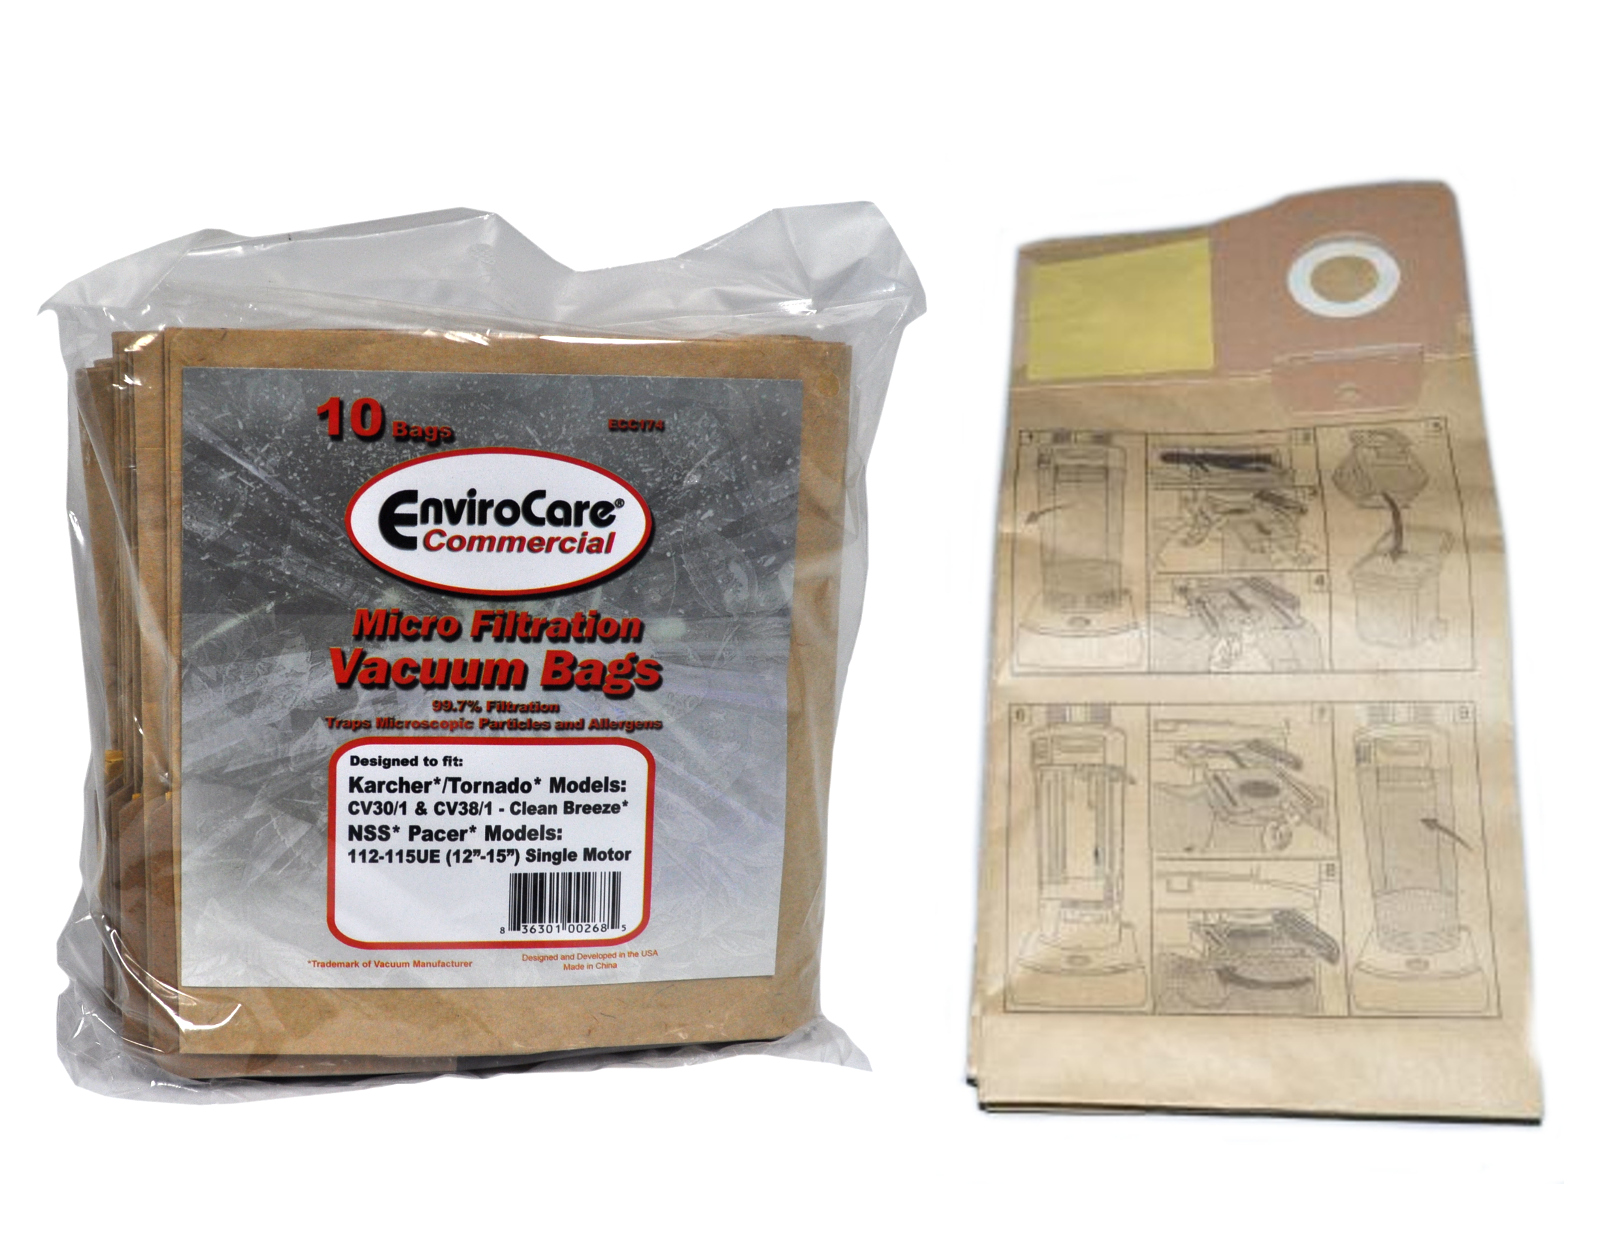 Envirocare Micro Filtration Vacuum Bags Designed To Fit Tornado CV-30 and CV-38 Clean Breeze Uprights 10 Pack